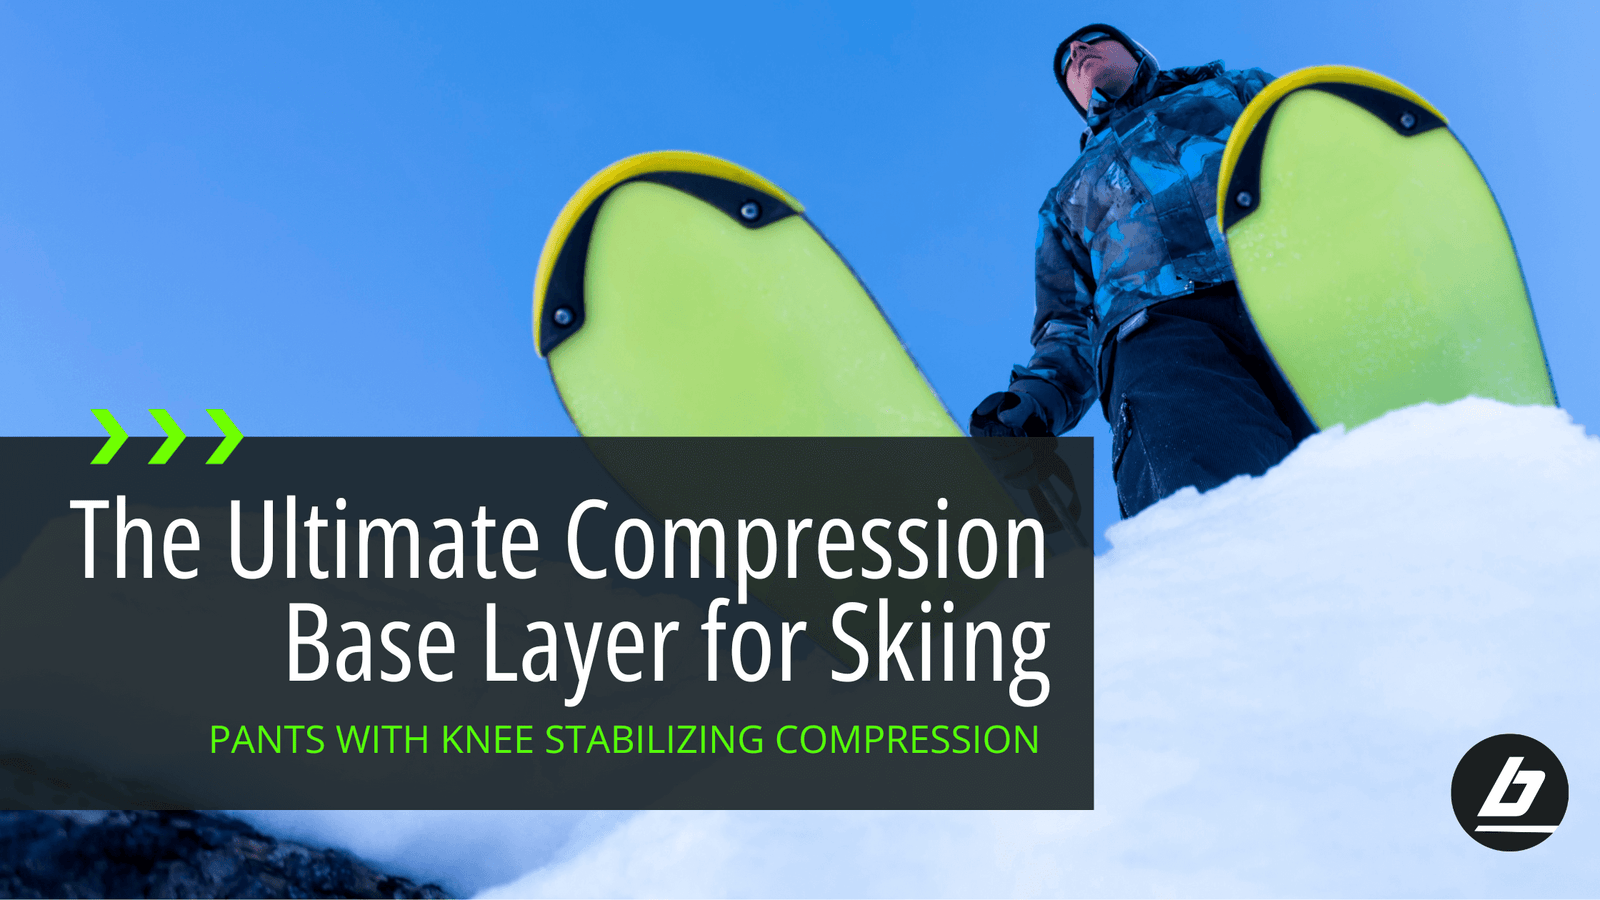 Blog banner for "The Ultimate Compression Base Layer for Skiing" showing green skis and the person wearing them from below. The best knee support for skiing, skiing knee support, thermal base layer, base layer, Skiing, thermal compression Bracelayer® Cana